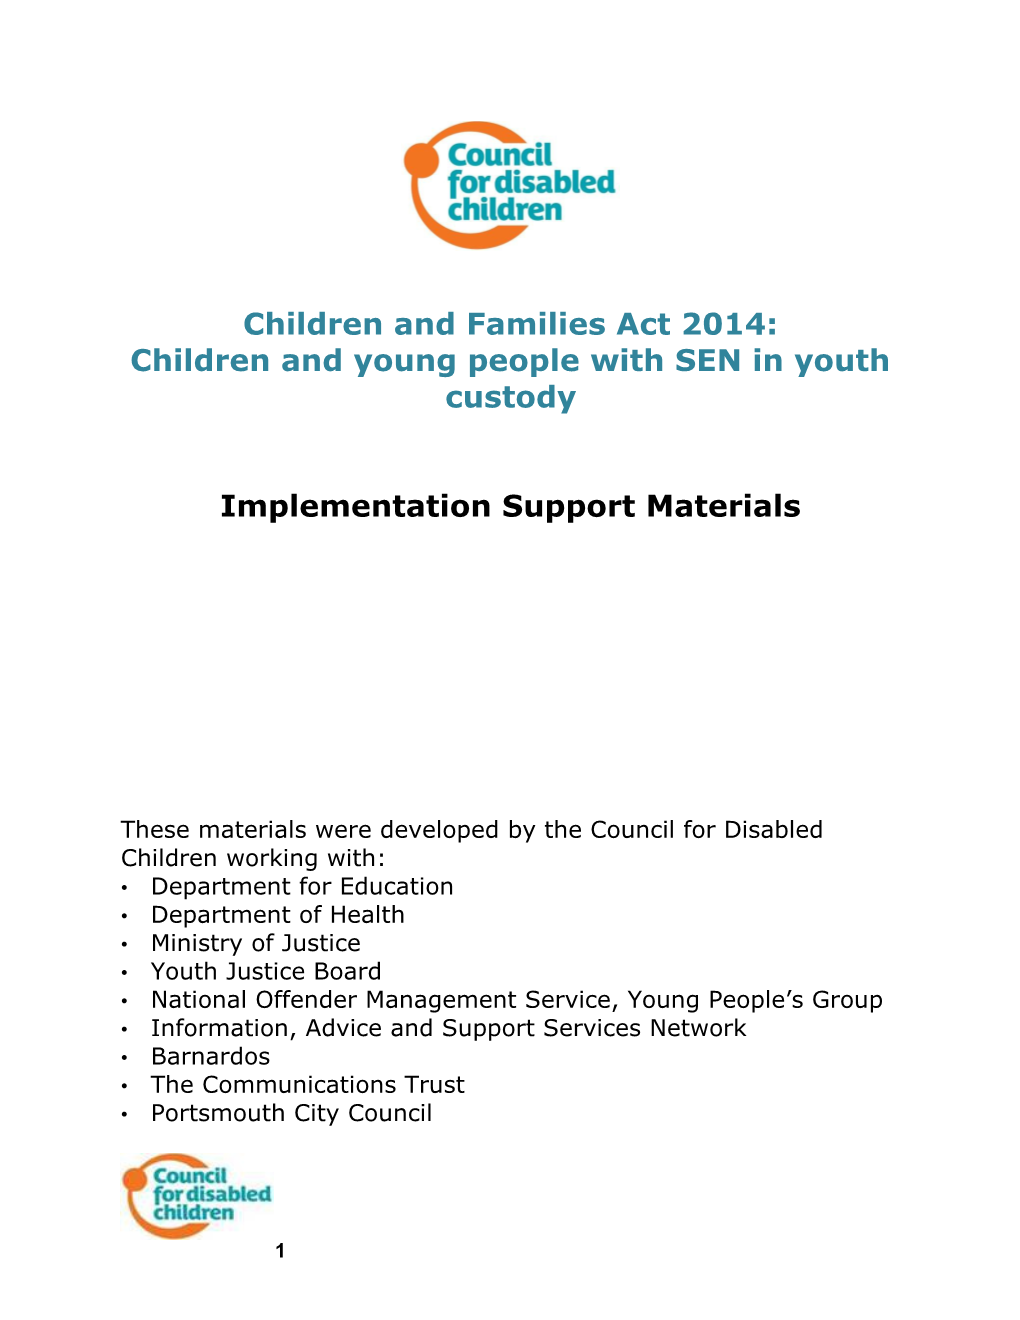 Children and Young People with SEN in Youth Custody